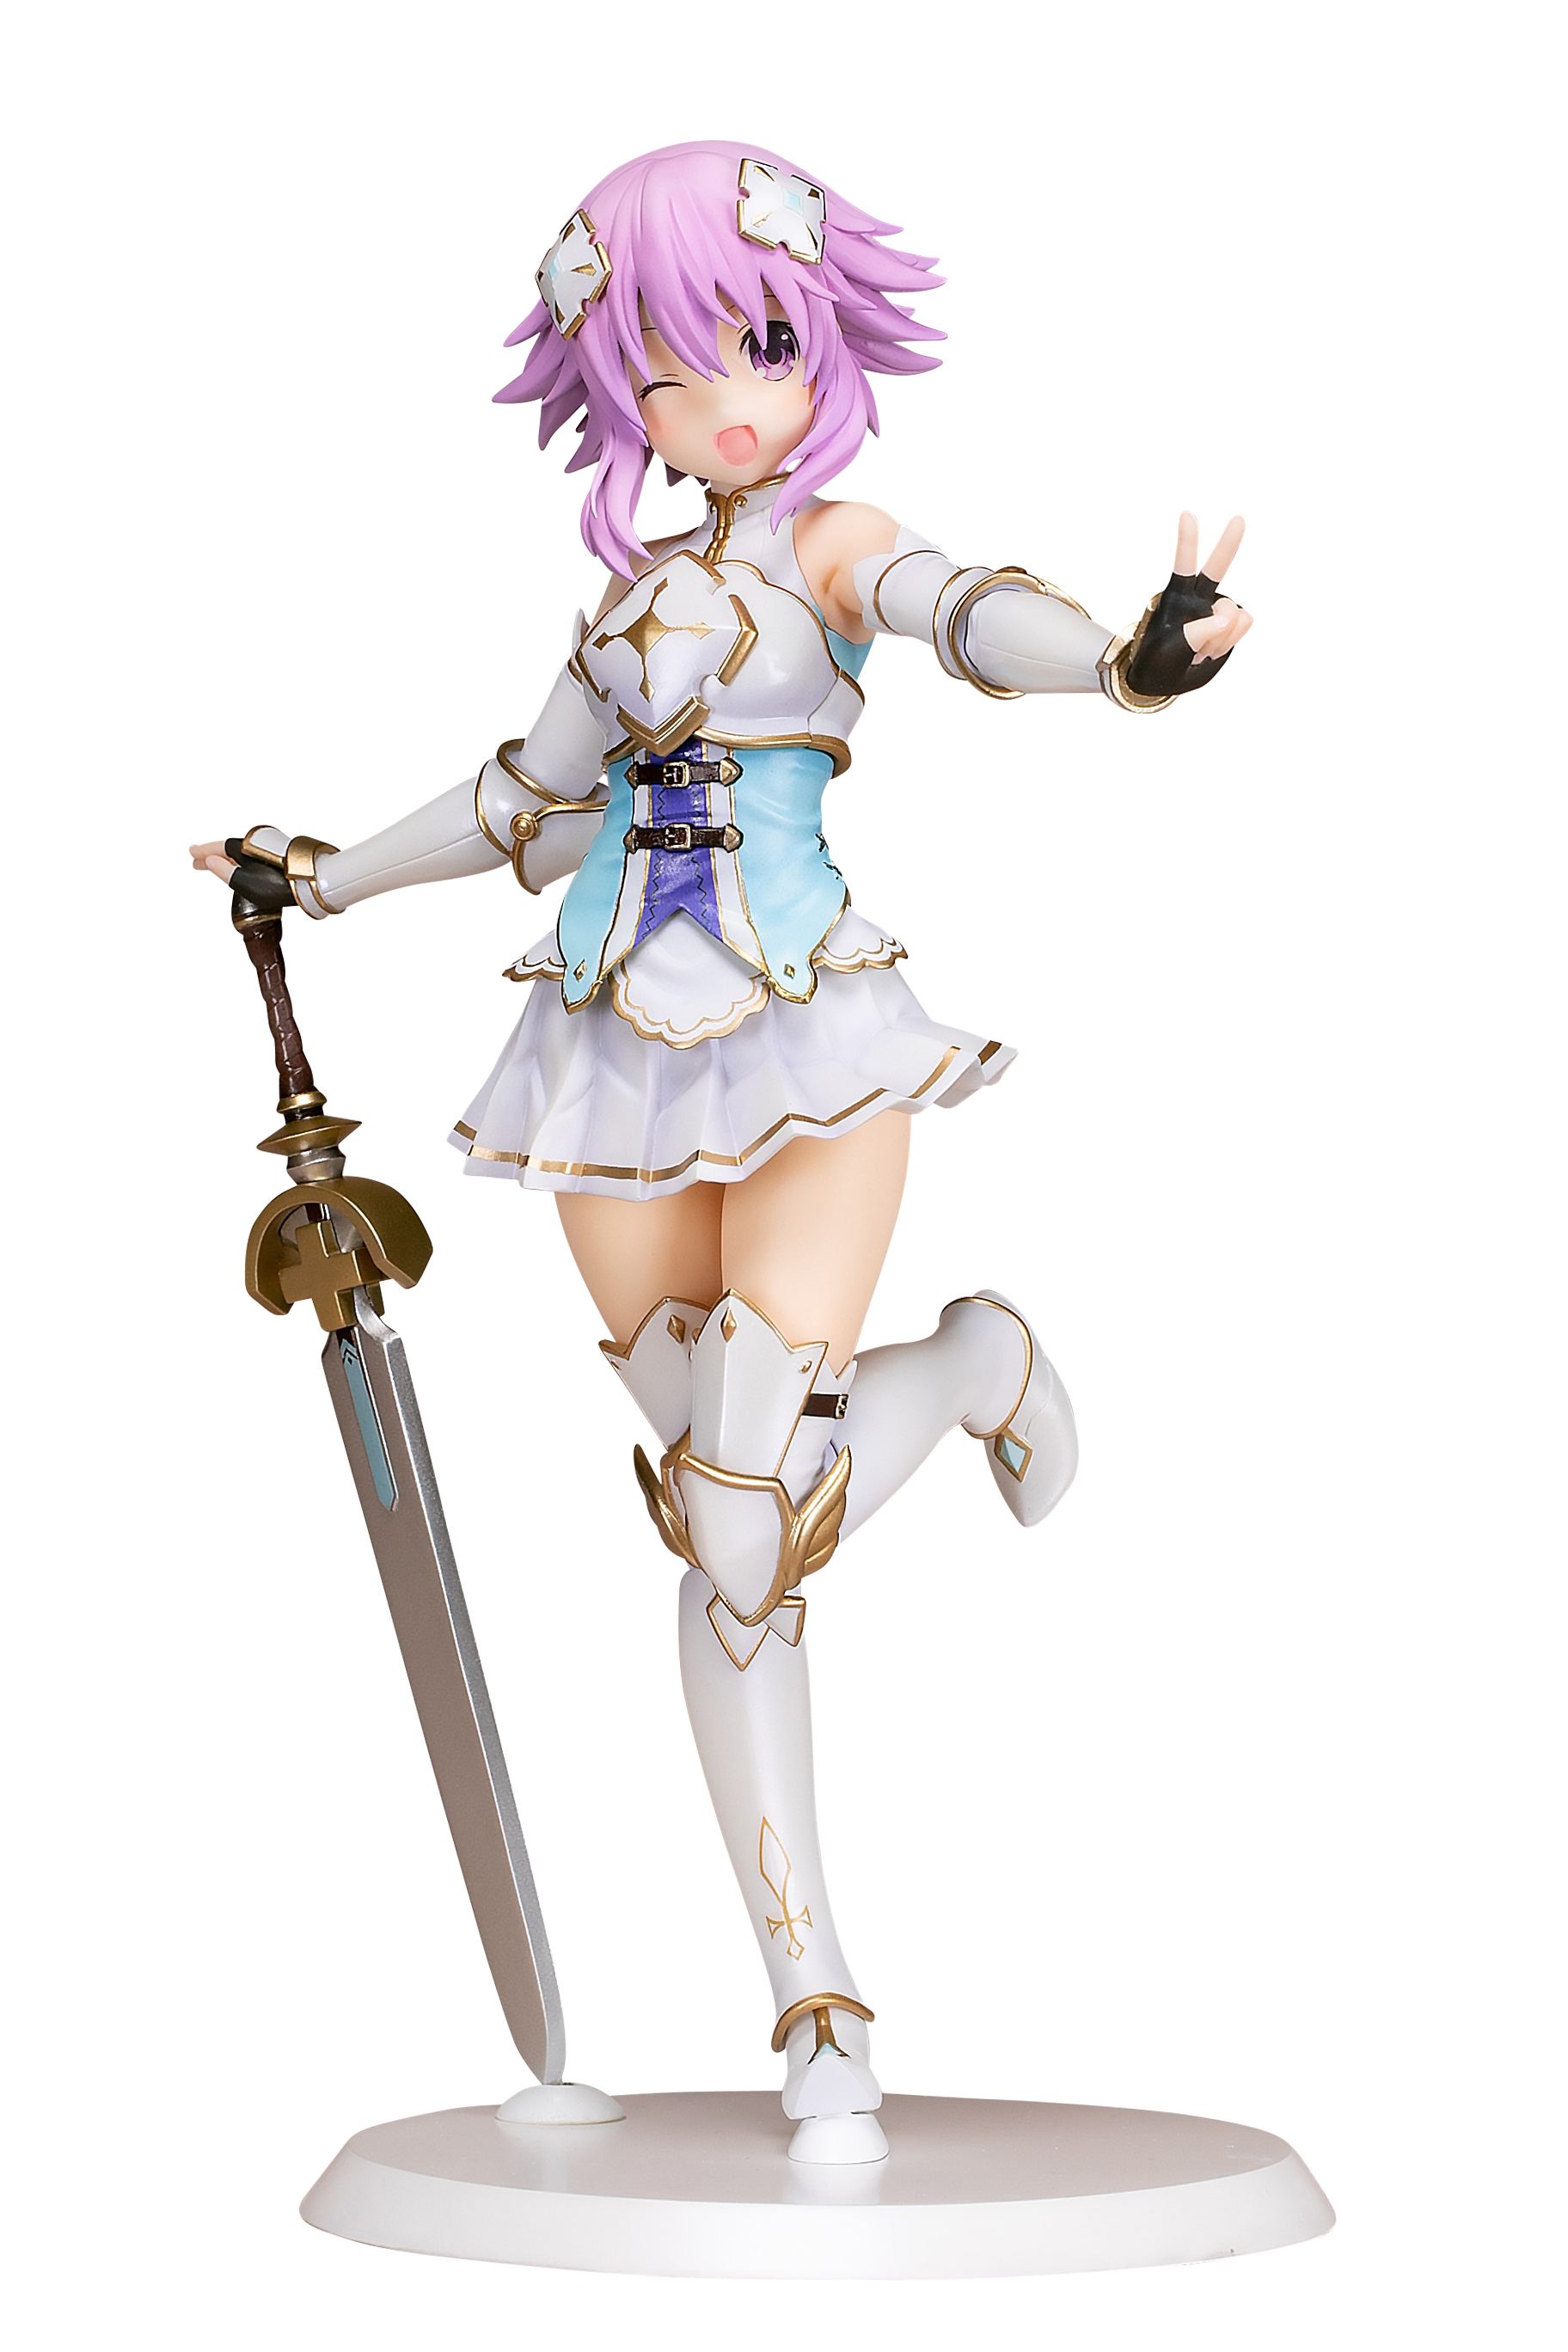 CYBERDIMENSION NEPTUNIA 4 GODDESSES ONLINE 1/7 SCALE PRE-PAINTED FIGURE: HOLY KNIGHT NEPTUNE Pulchra